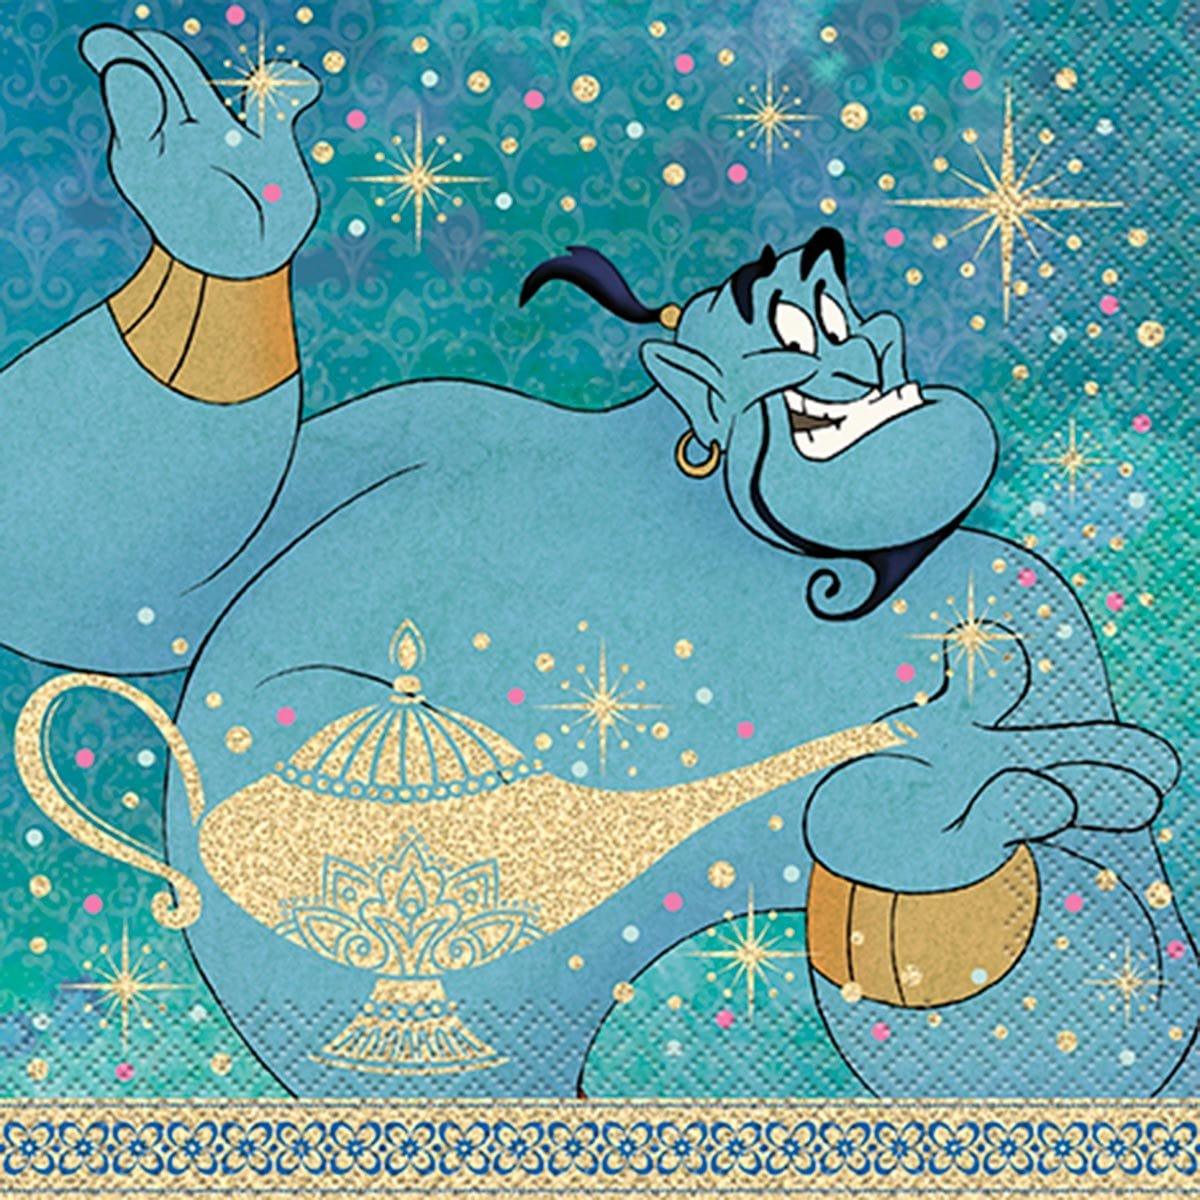 Buy Kids Birthday Aladdin lunch napkins, 16 per package sold at Party Expert